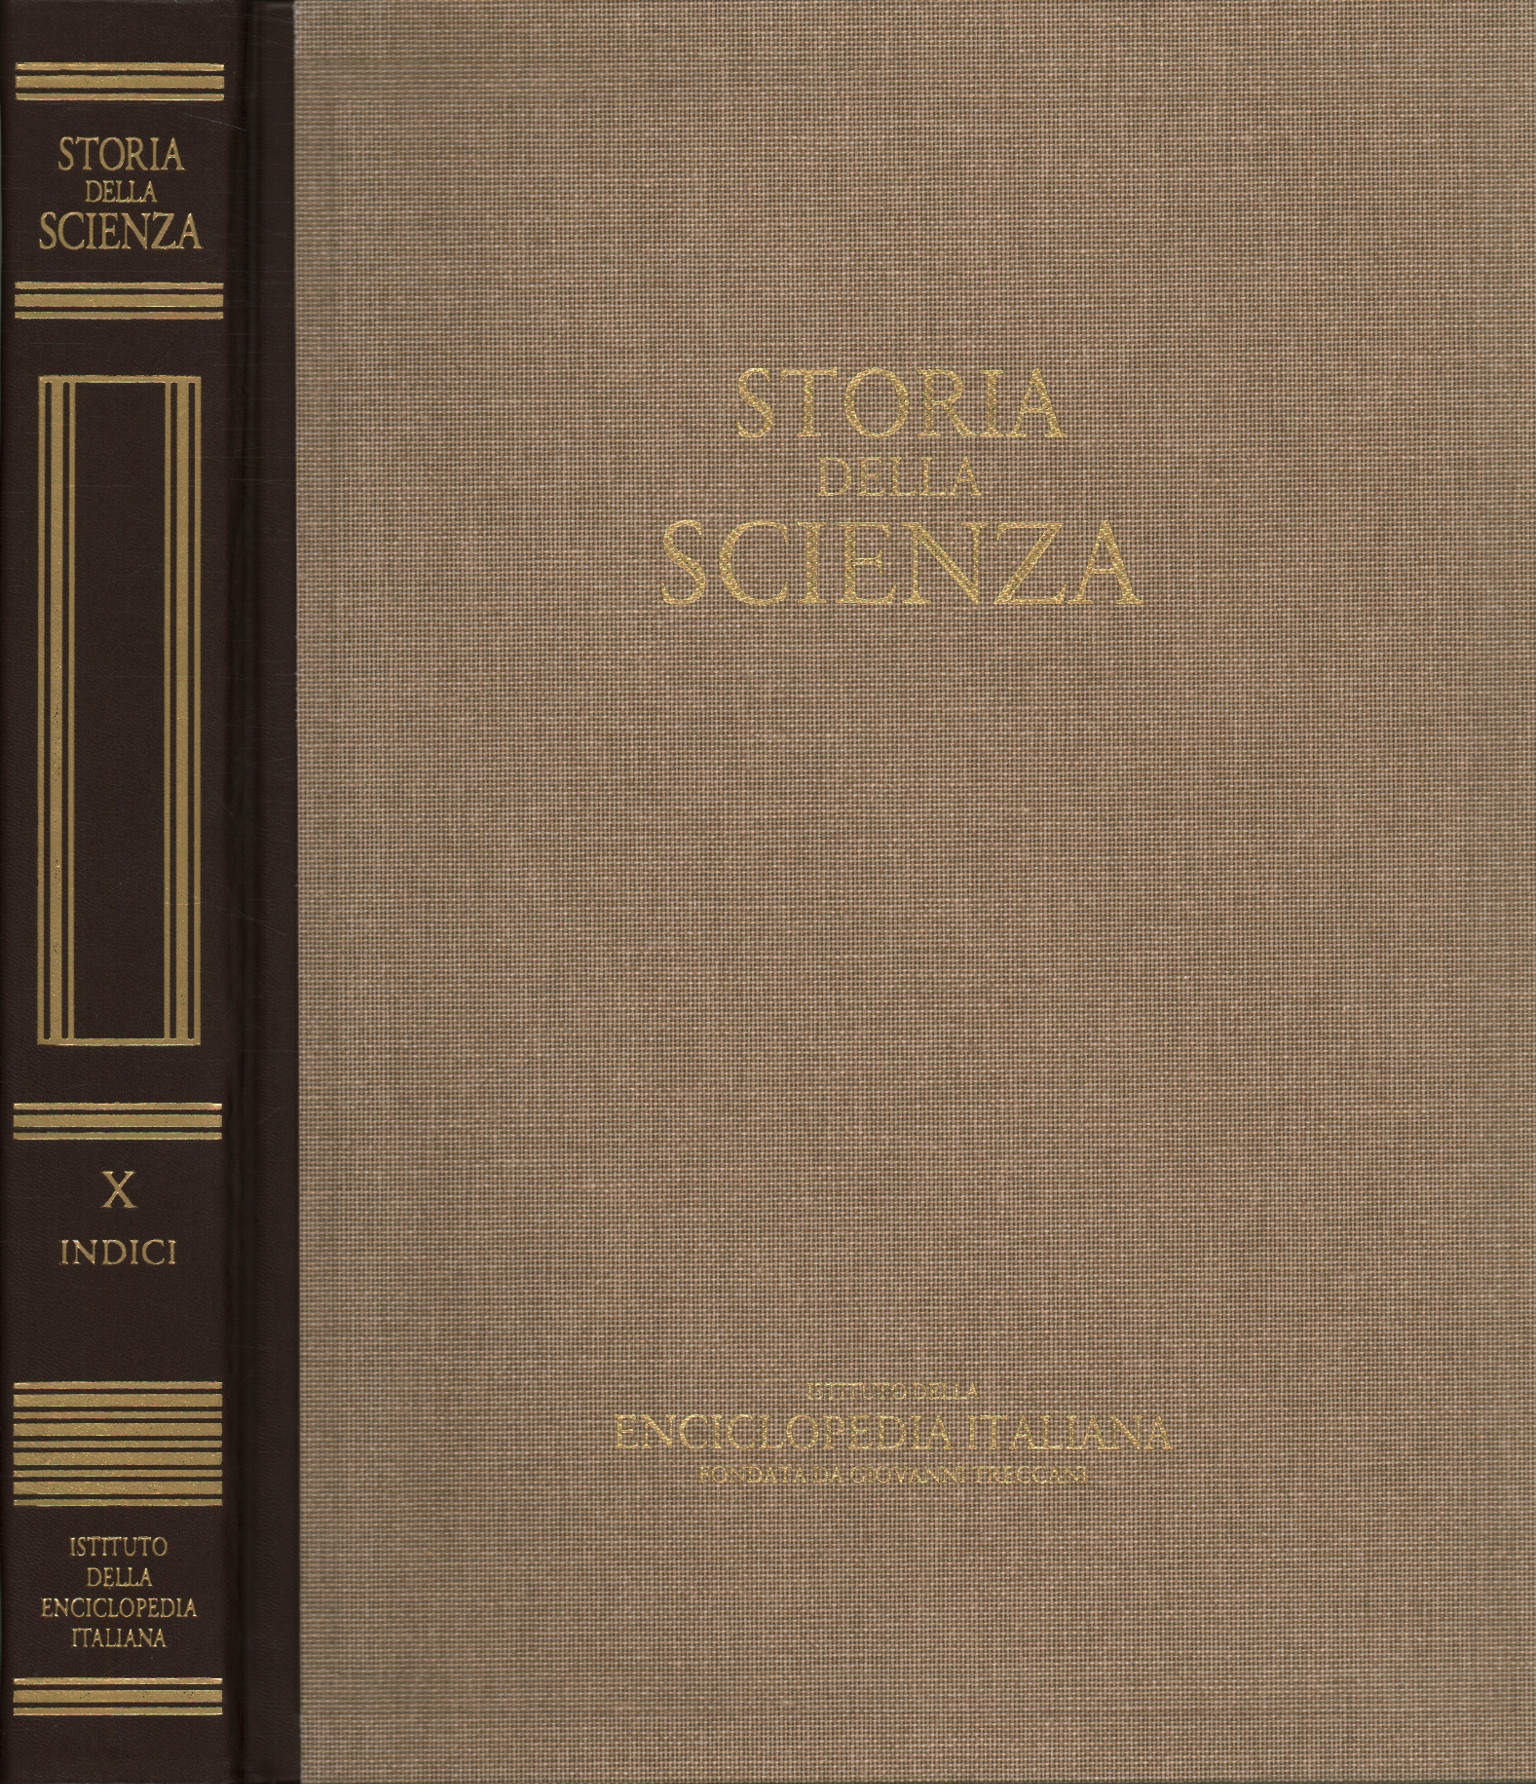 History of science Volume X. Indexes, History of science. Indices (Volume X)